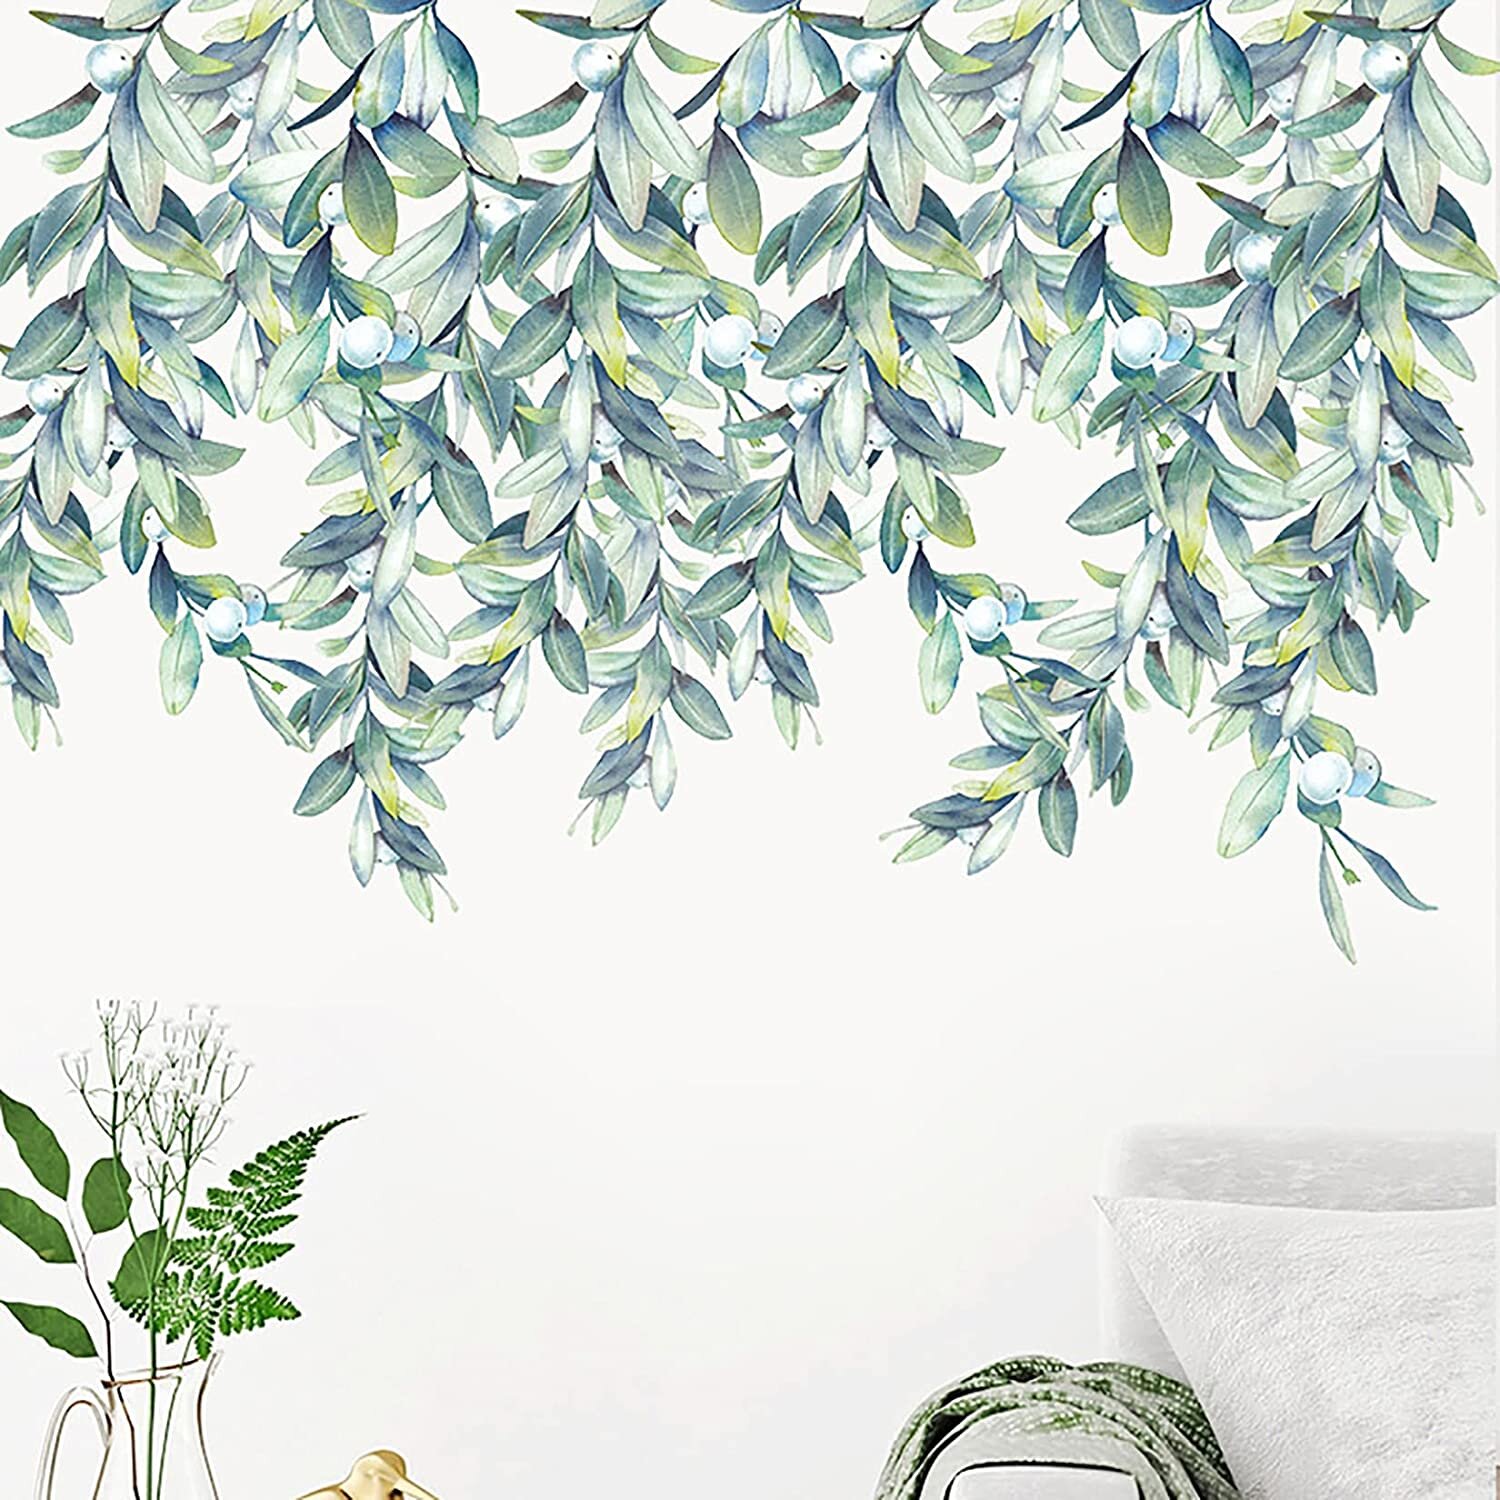 ULENDIS Removable Colorful Leaves Plants Flowers Wall Decals Waterproof DIY Flying Bird Wall Decor for Sofa Bedroom Living Room TV Background Wall Art Decor Hanging Green Vine Wall Stickers 